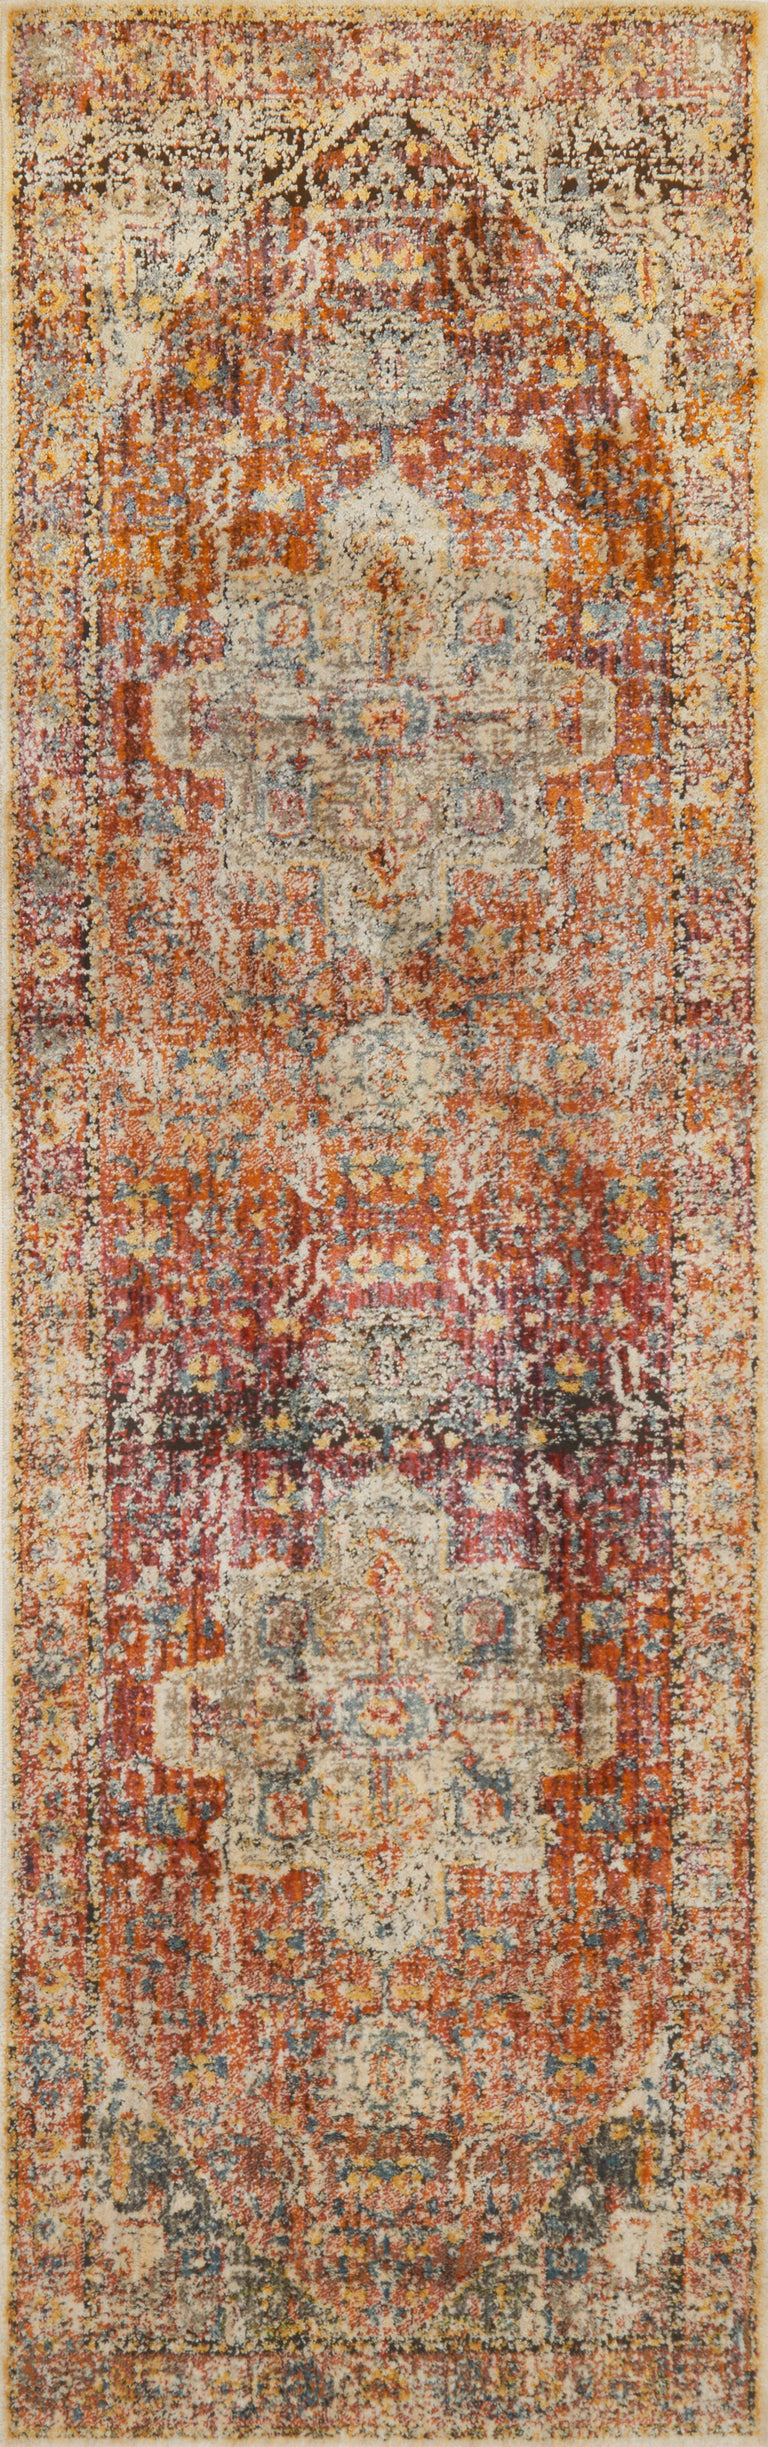 Loloi Rugs Javari Collection Rug in Berry, Sunrise - 9'6" x 12'6"